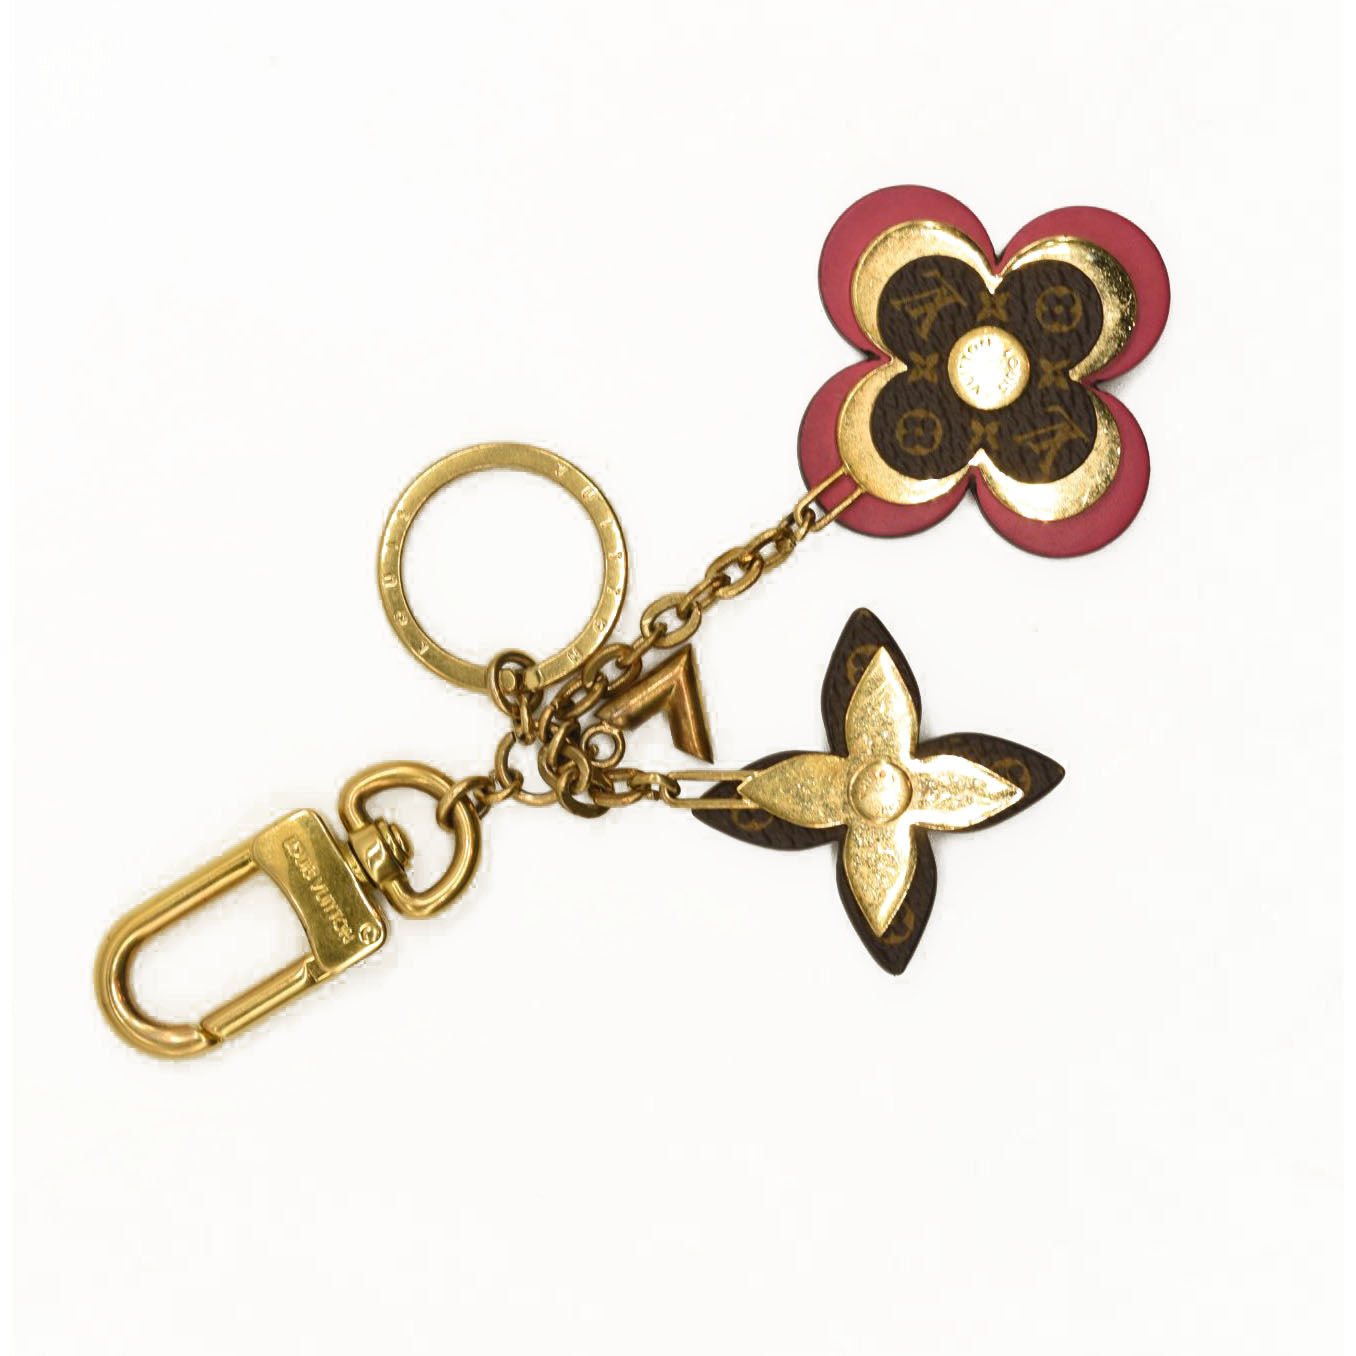 Louis Vuitton Blooming flowers chain bag charm and key holder